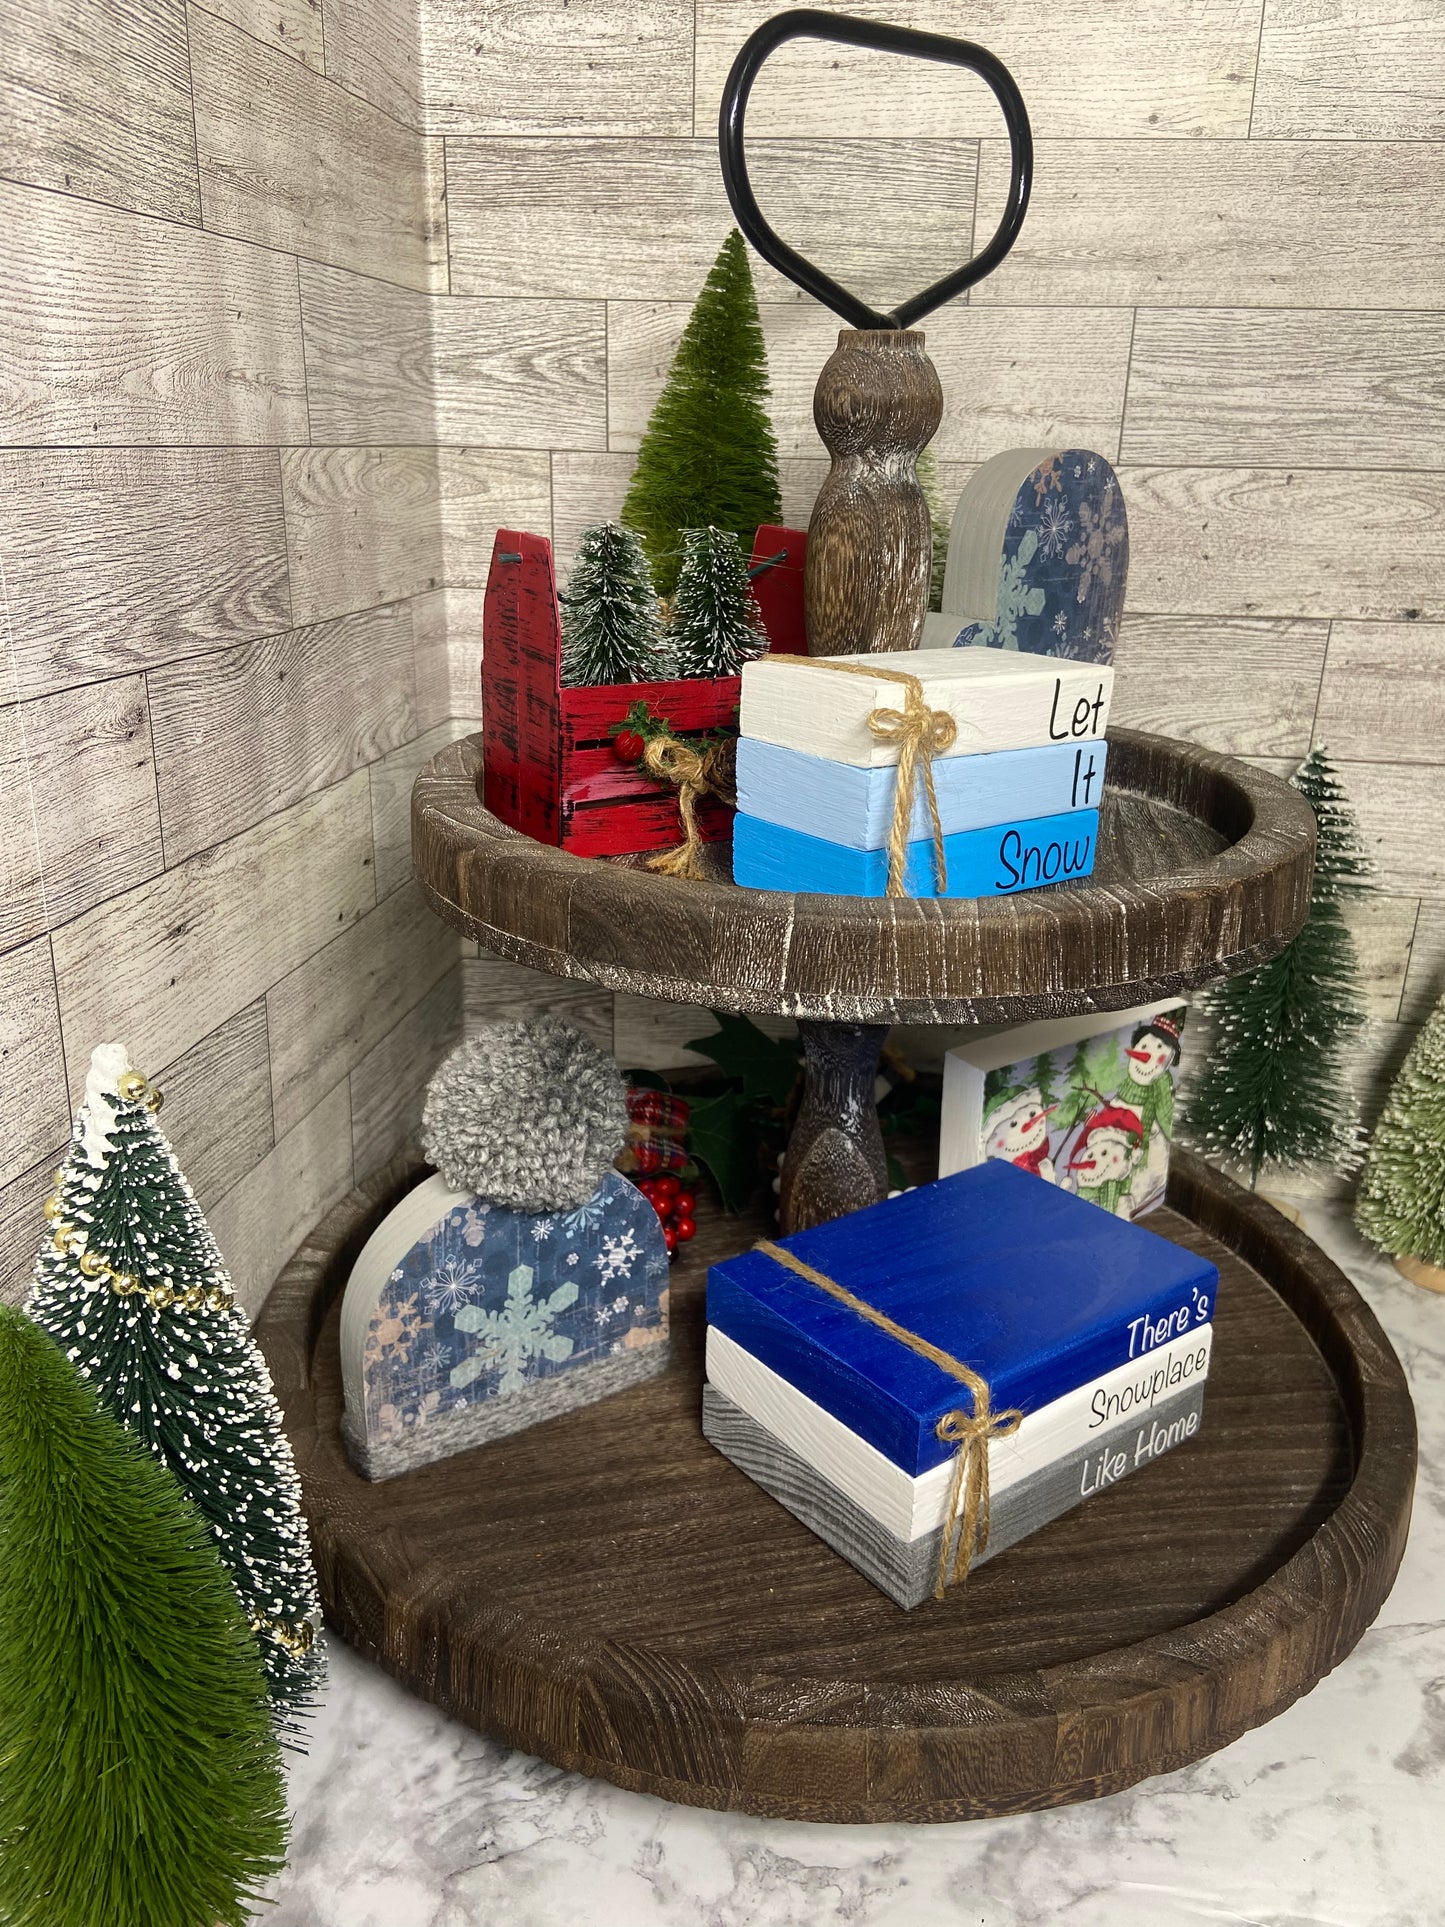 There’s Snowplace Like Home - Large Christmas Tiered Tray Book